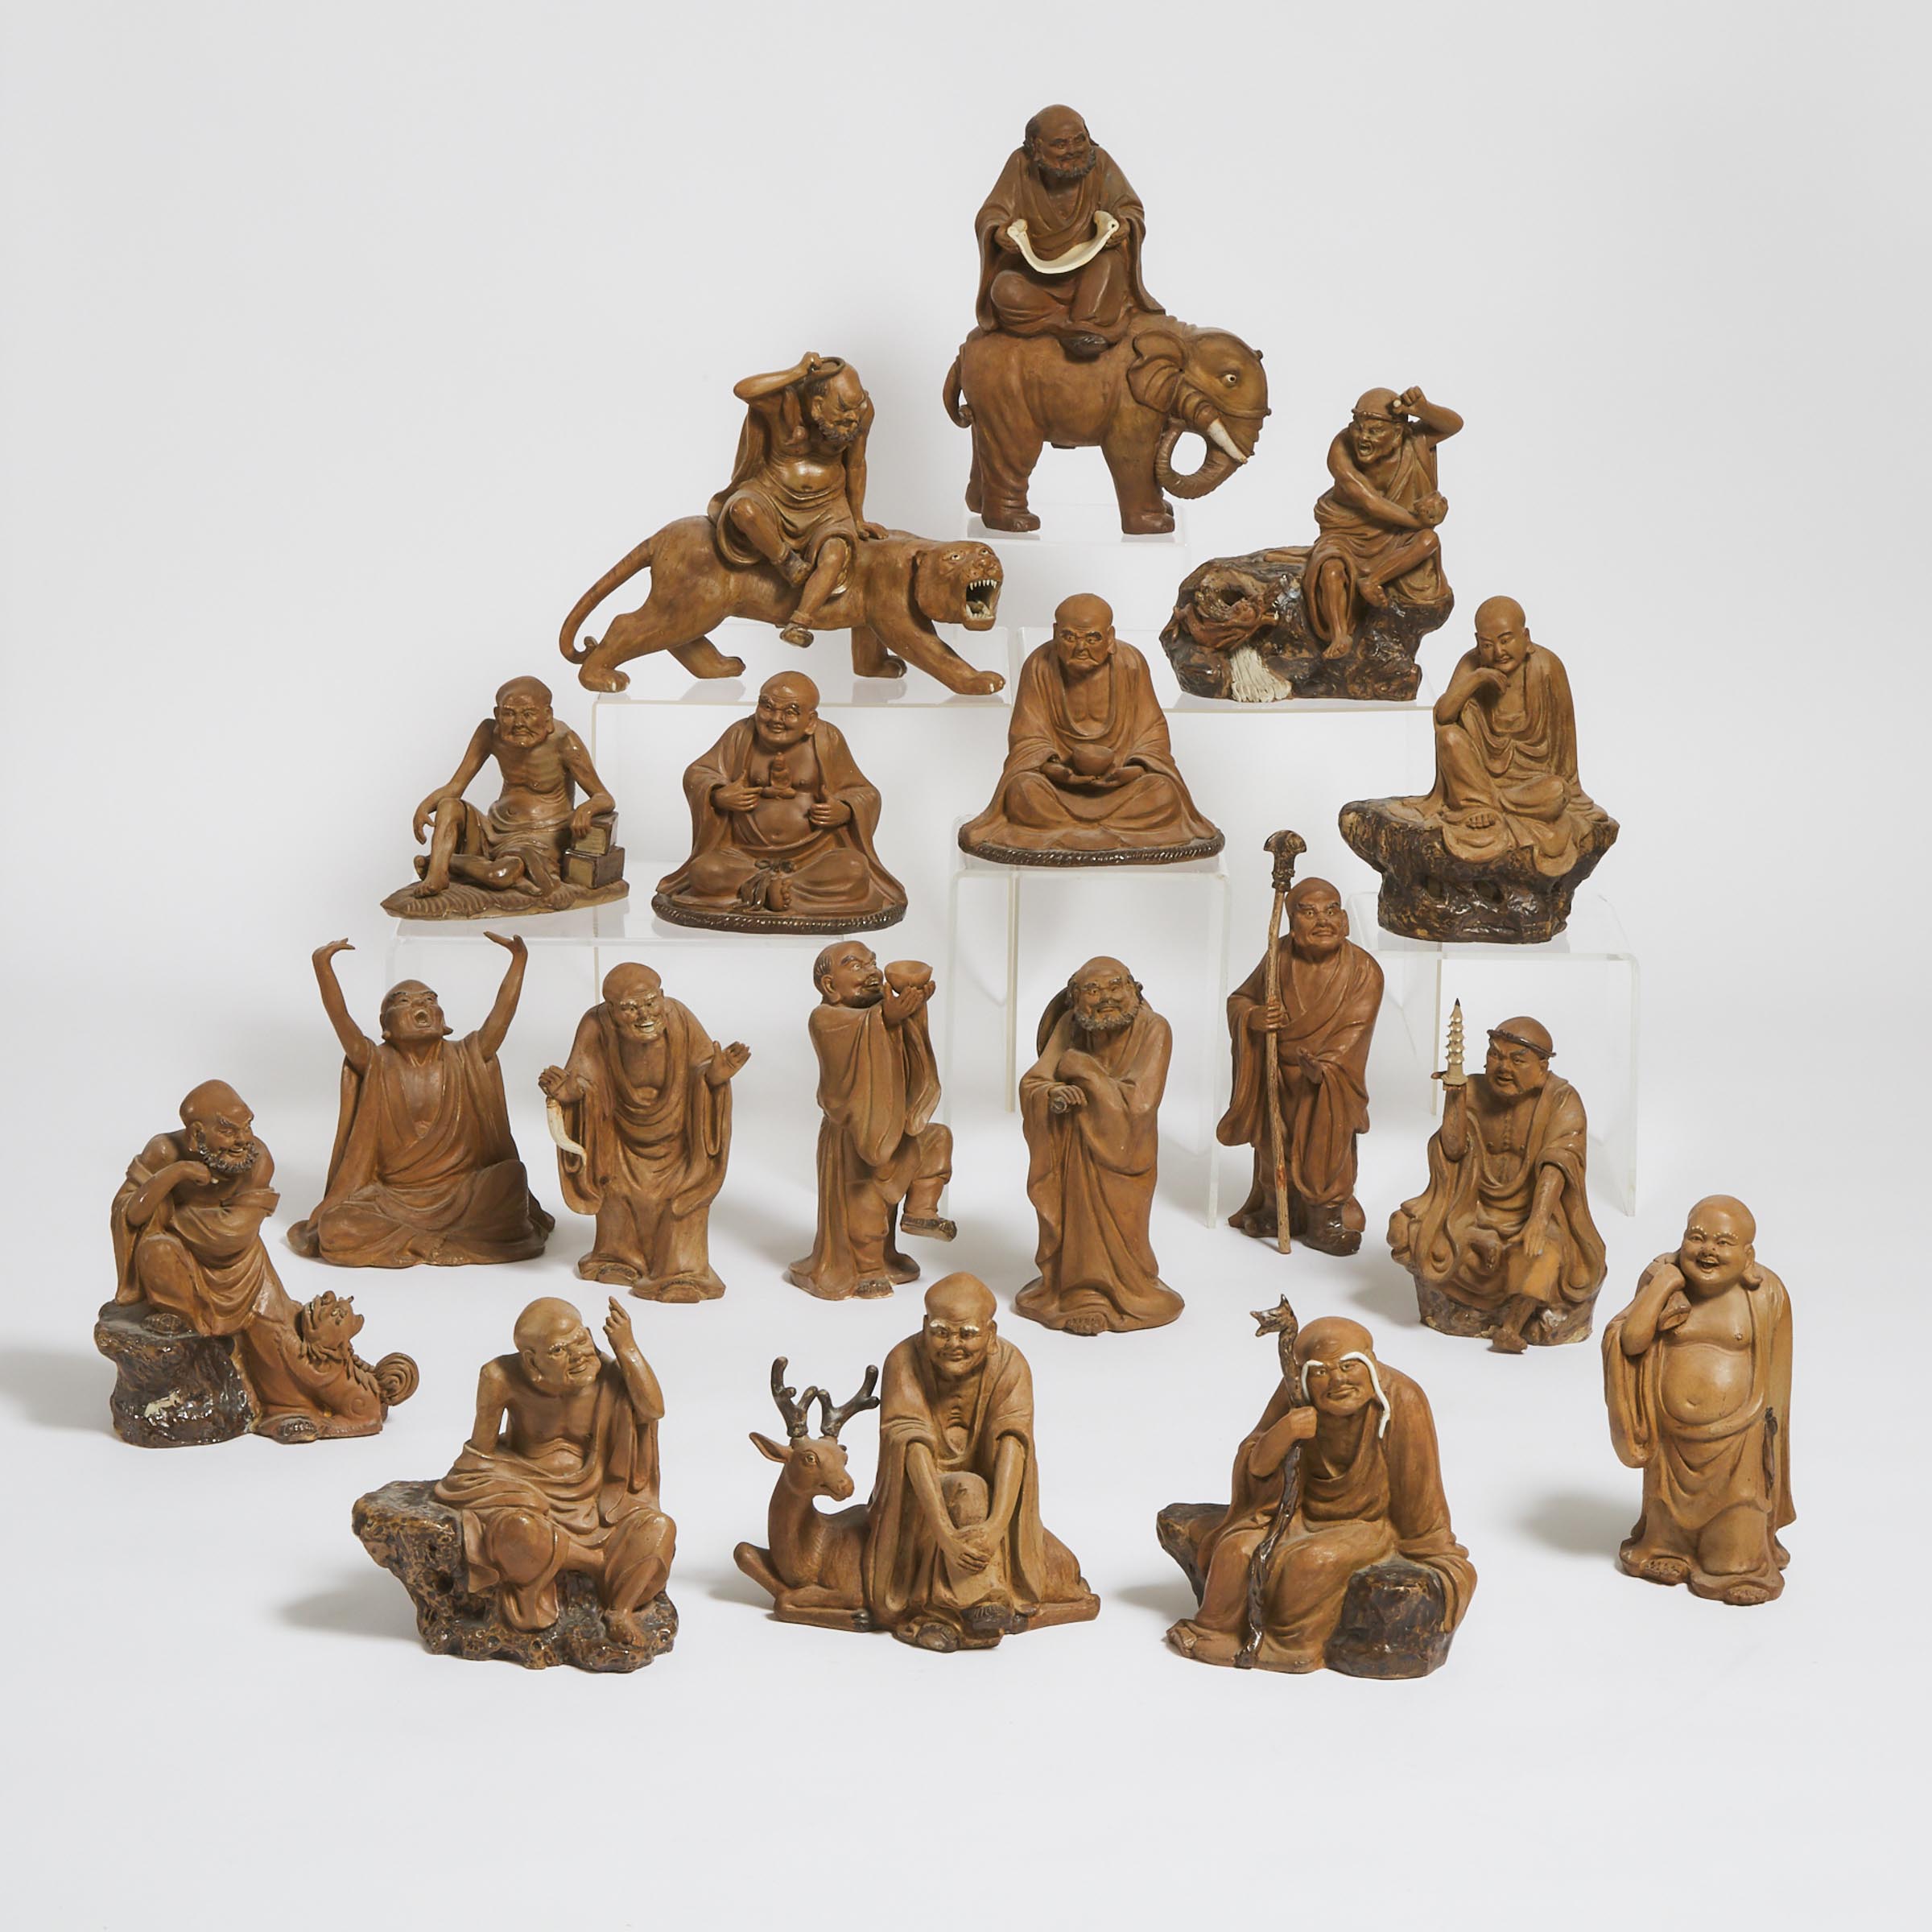 A Complete Set of Ceramic Figures of the Eighteen Luohan (Arhats), Shiwan, Circa 1980